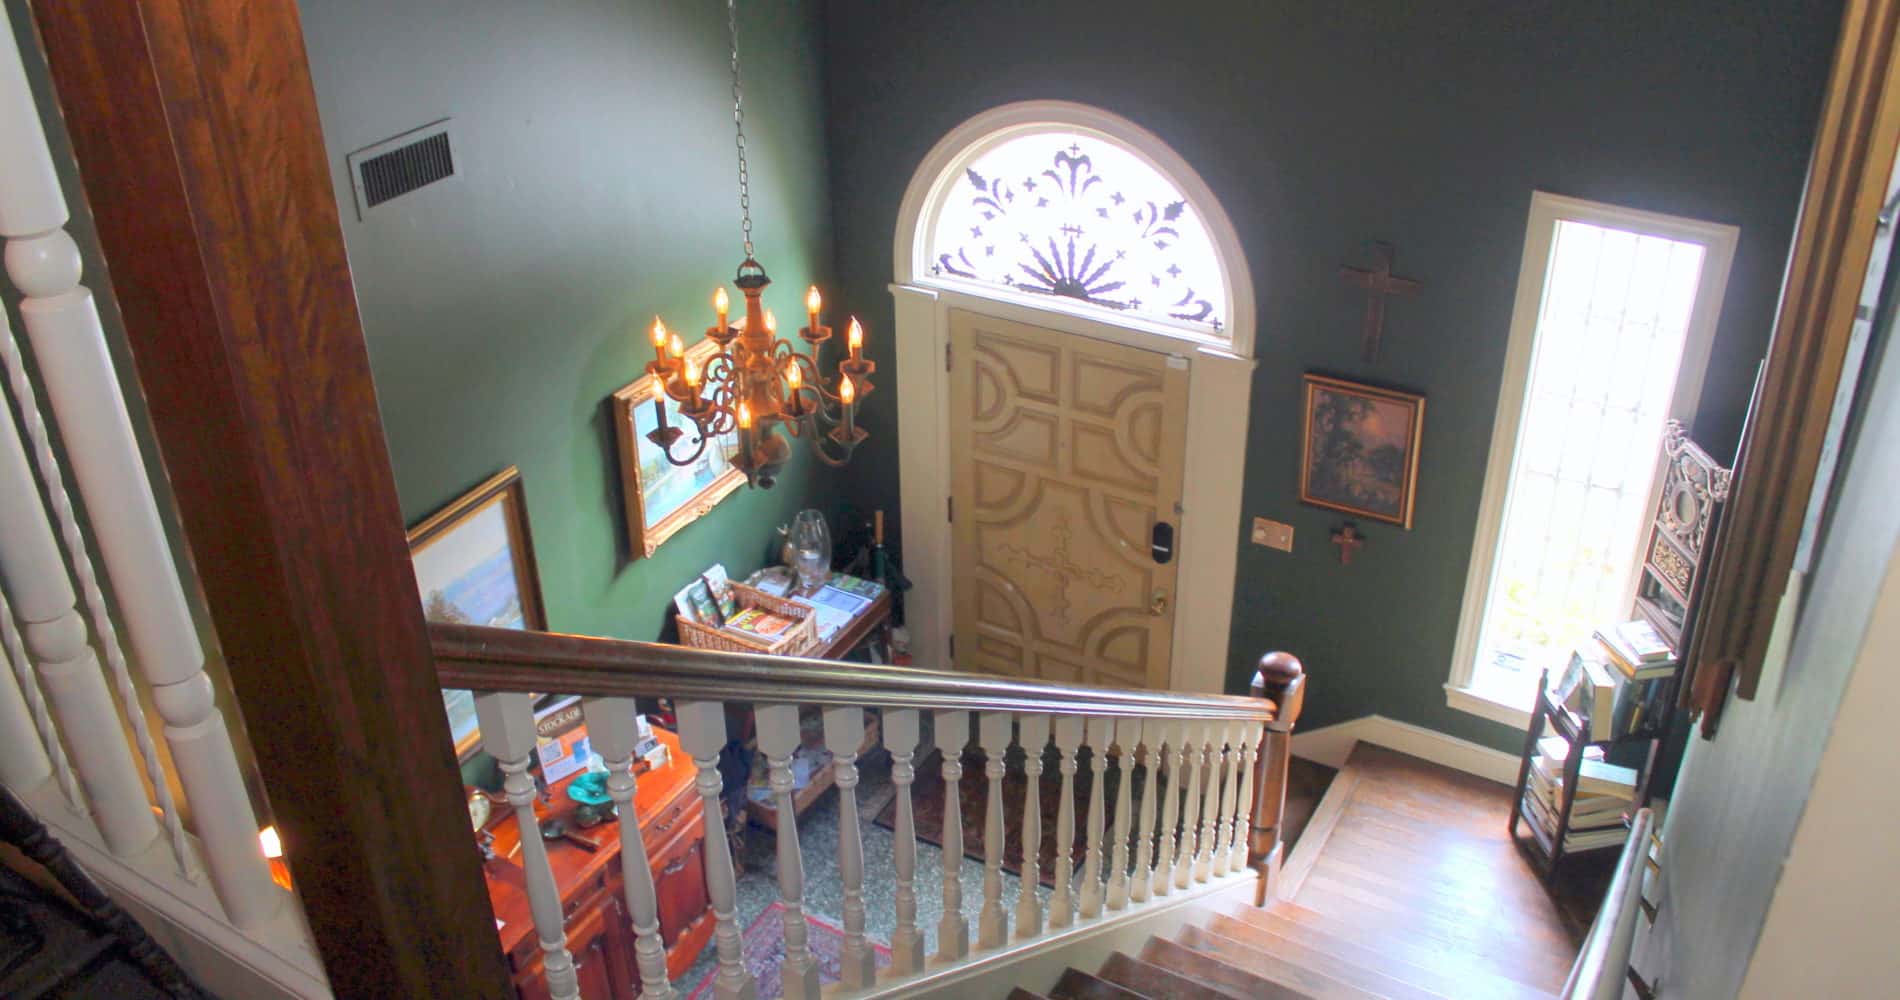 Looking down the stairs towards the front door of The Stockade